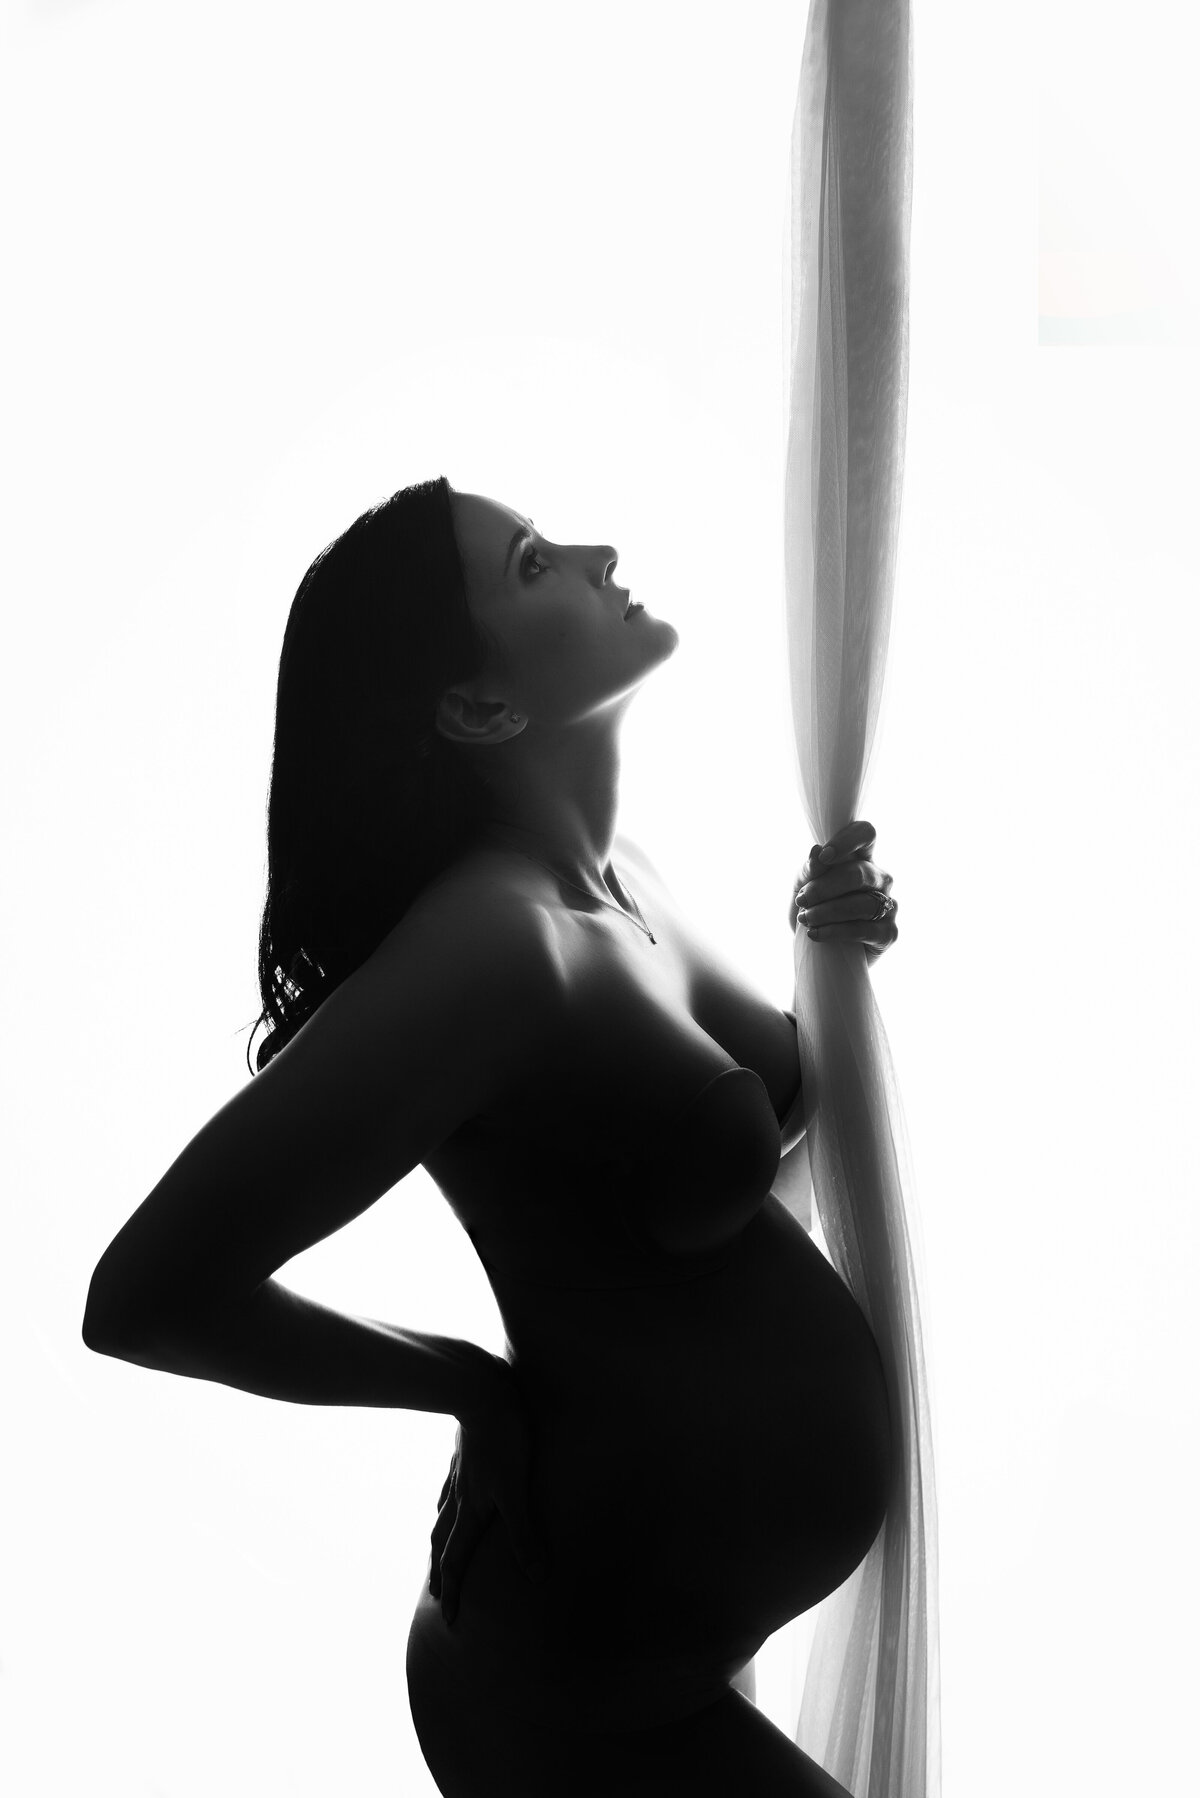 Black and white maternity portrait with woman standing to side showing her baby bump with right hand on back and left hand holding fabric coming from ceiling